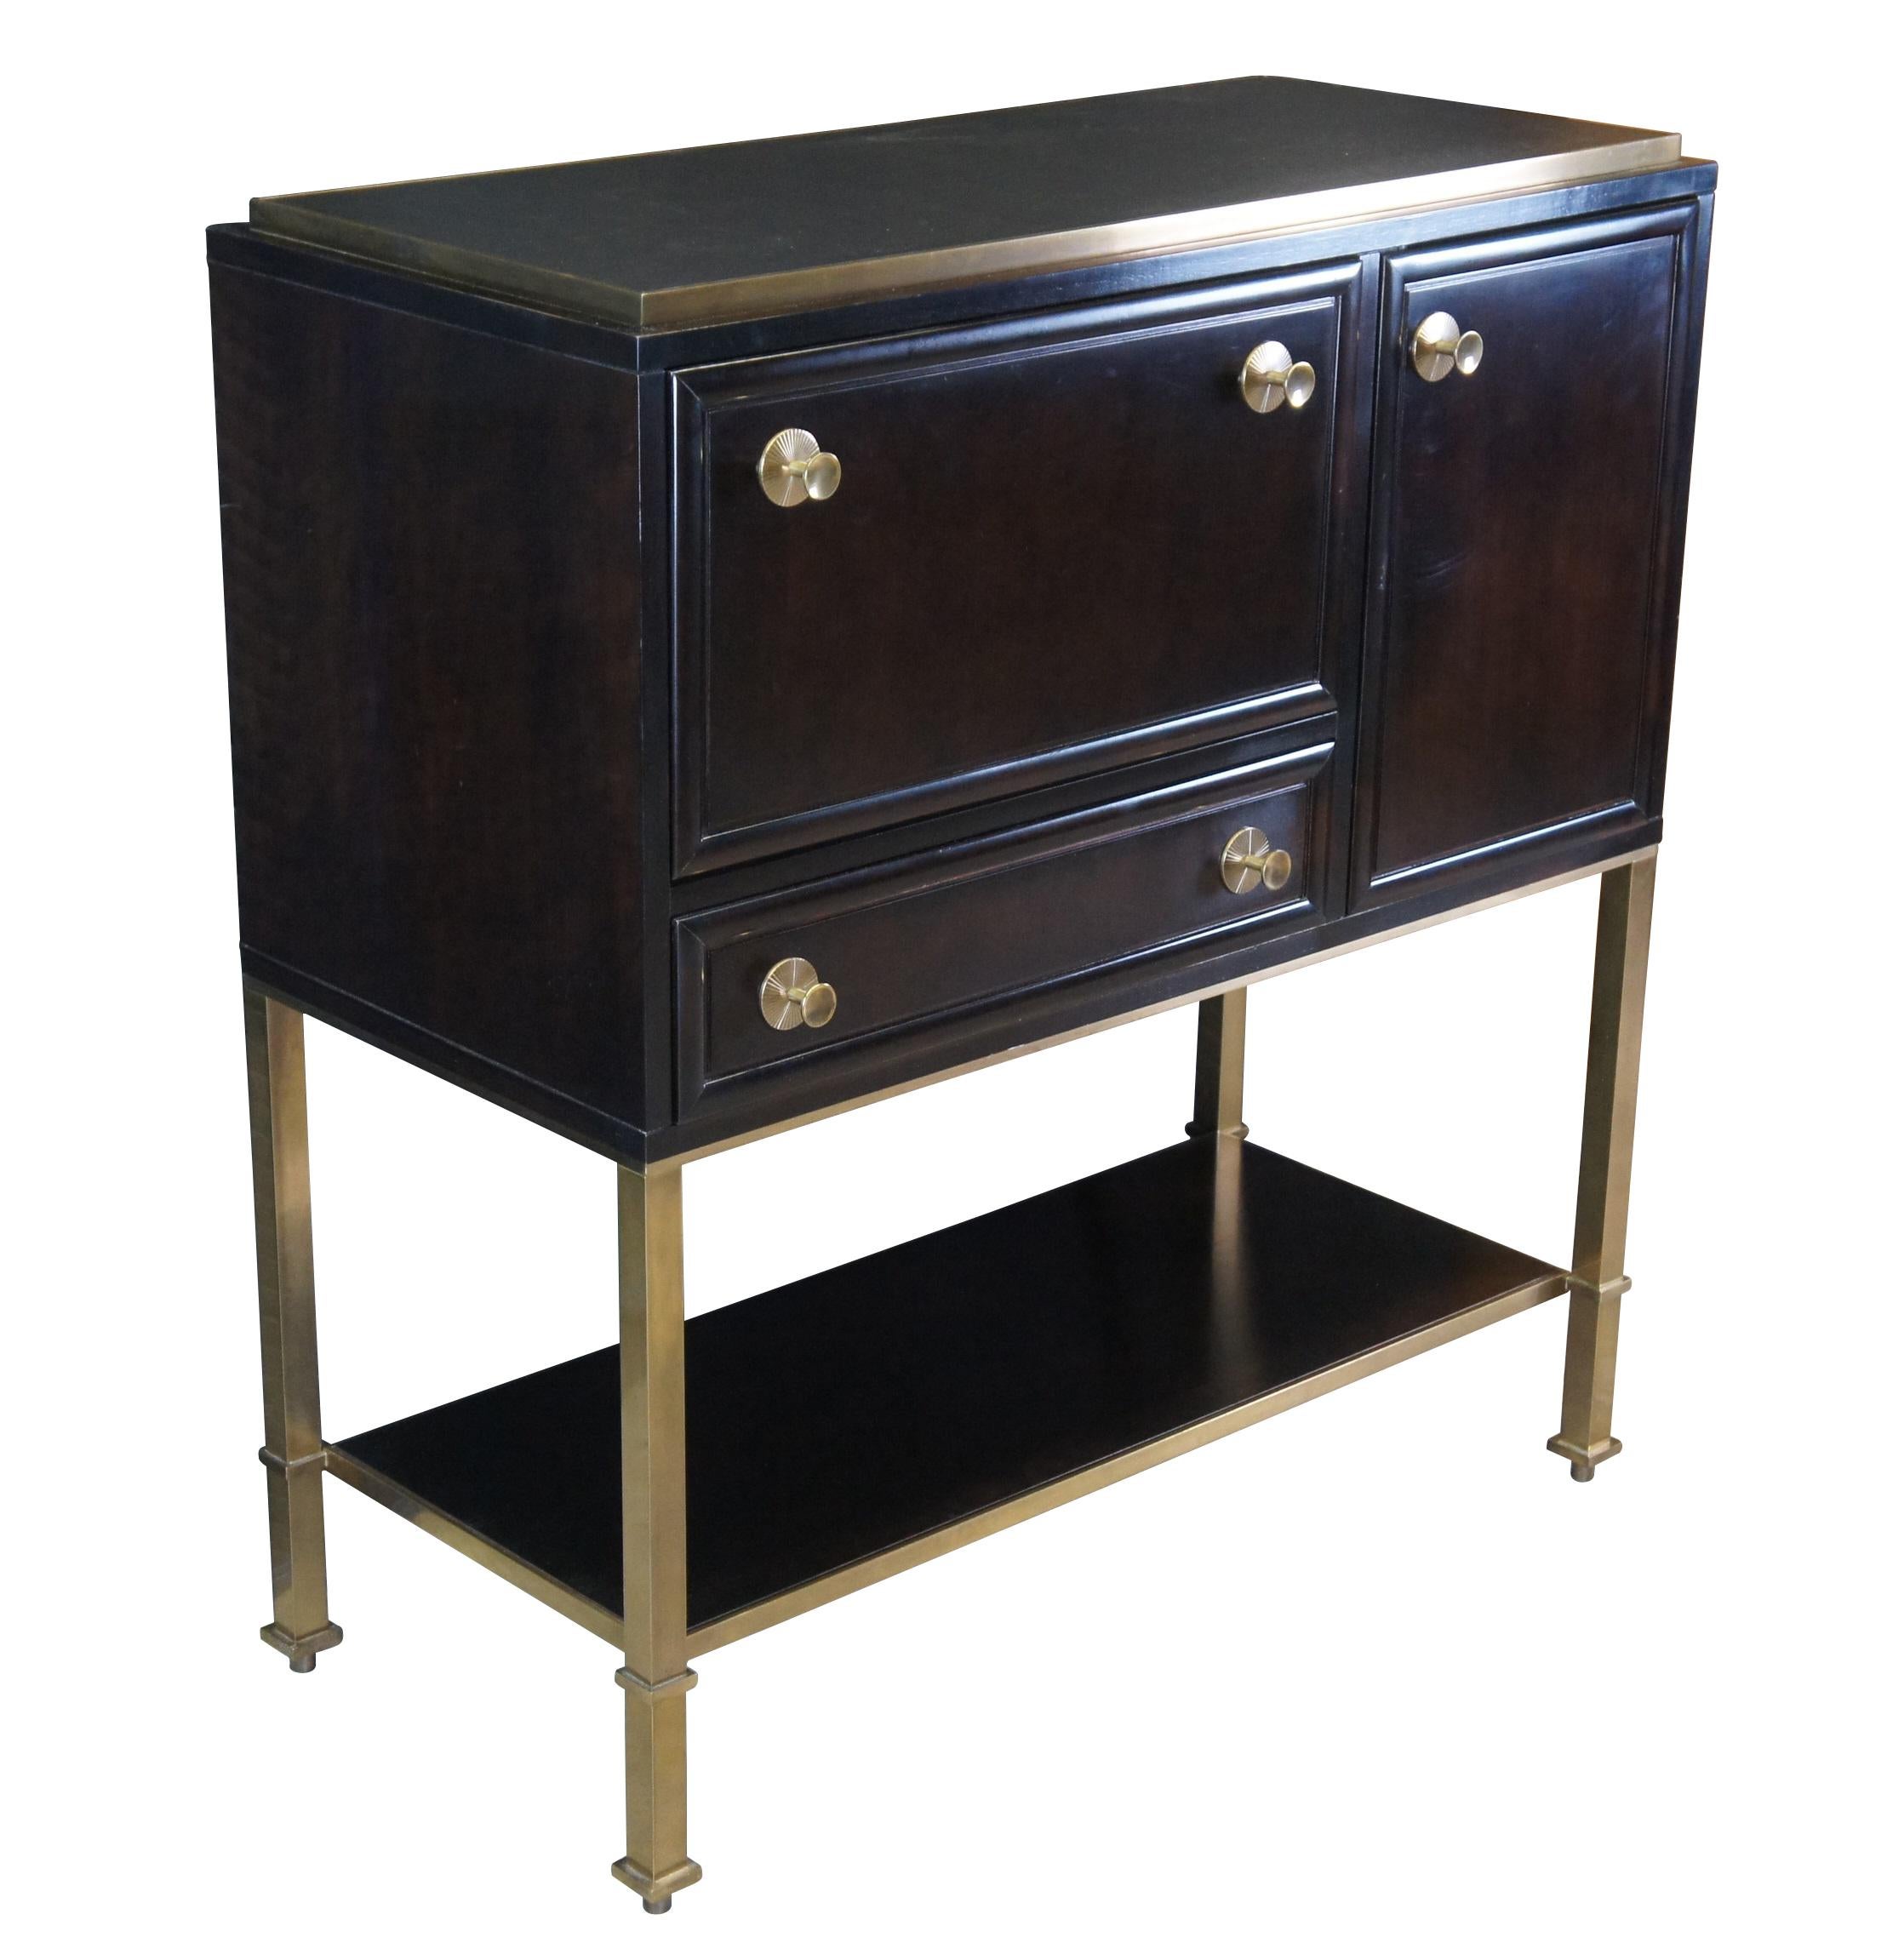 #40272

The Dansu Bar Cabinet by Laura Kirar for Baker Furniture, #9130

Walnut and ebony veneers and brass hardware dress up this bar, which has a black leather-inset top. In addition to the side door and dovetailed oak drawer with liner, there's a